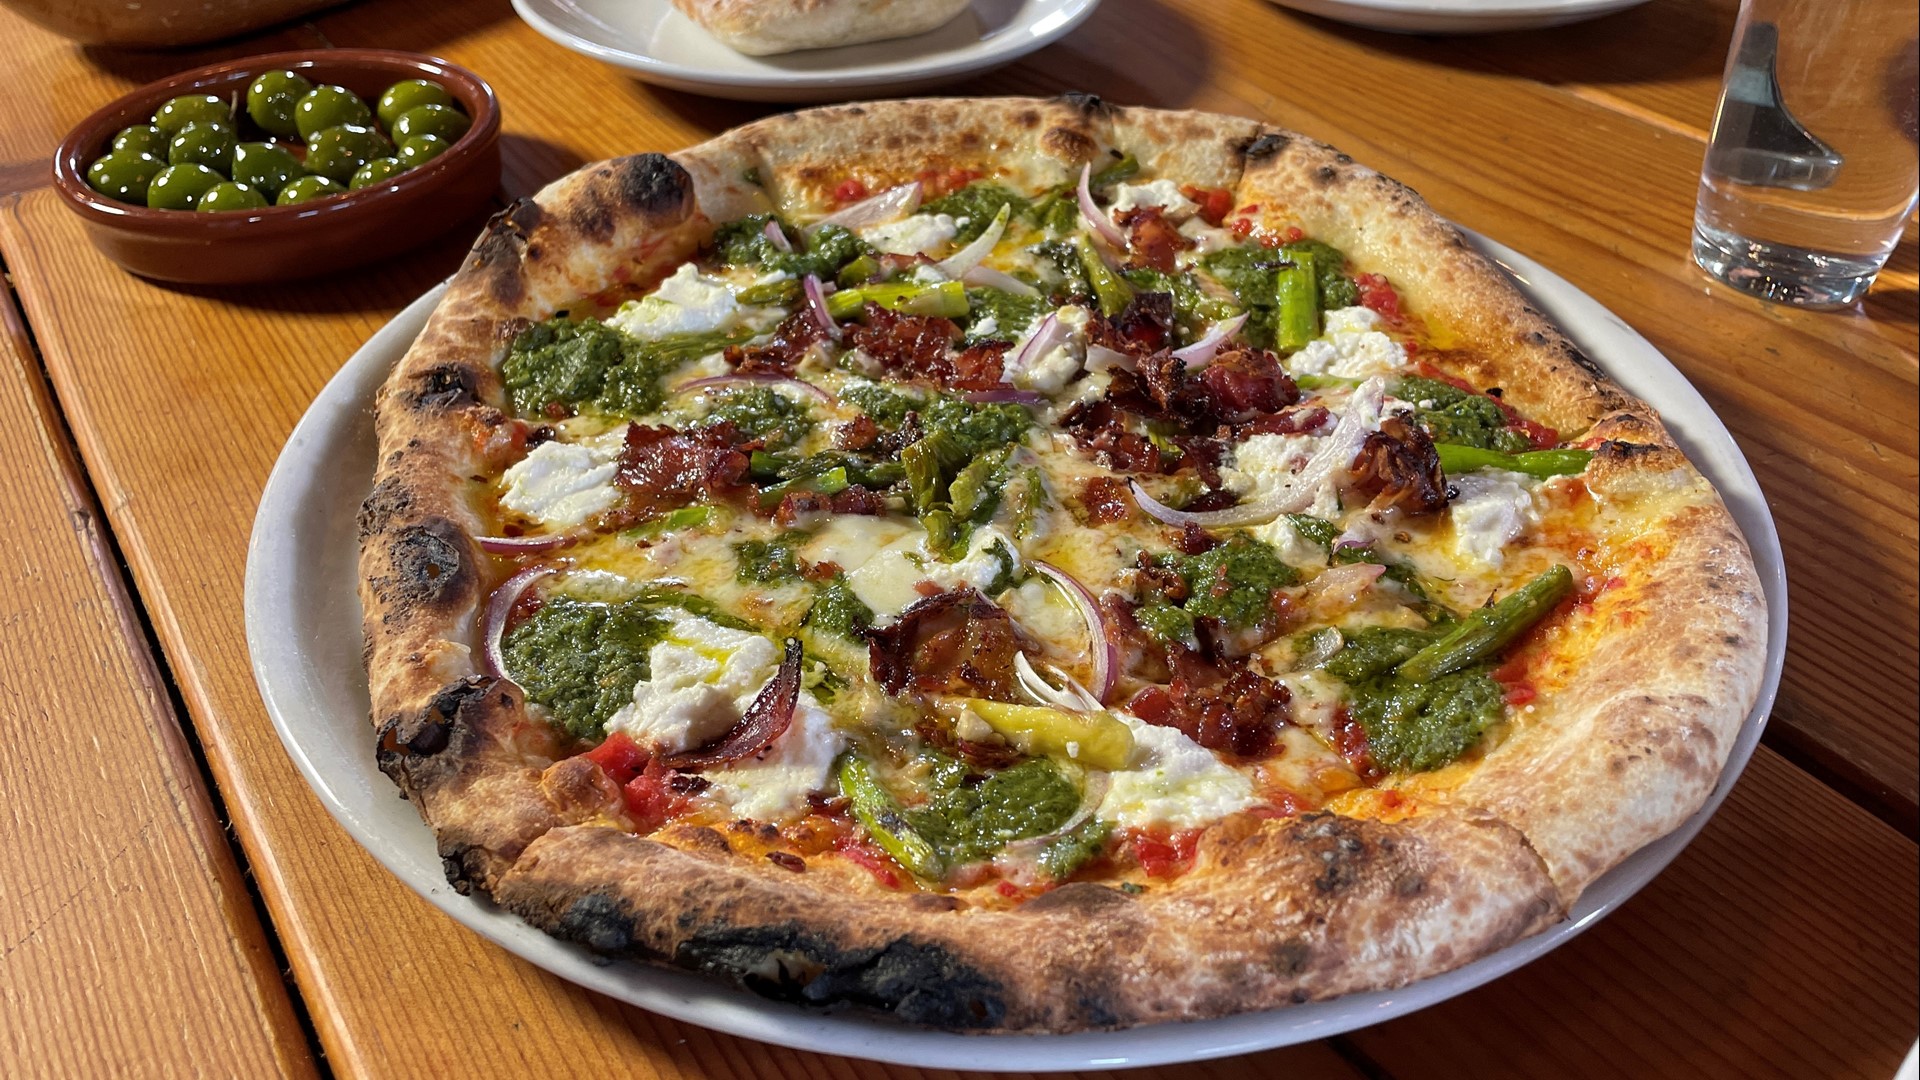 The new spring cocktails and pizza are available at the restaurant's four locations in Seattle and Mercer Island. #k5evening